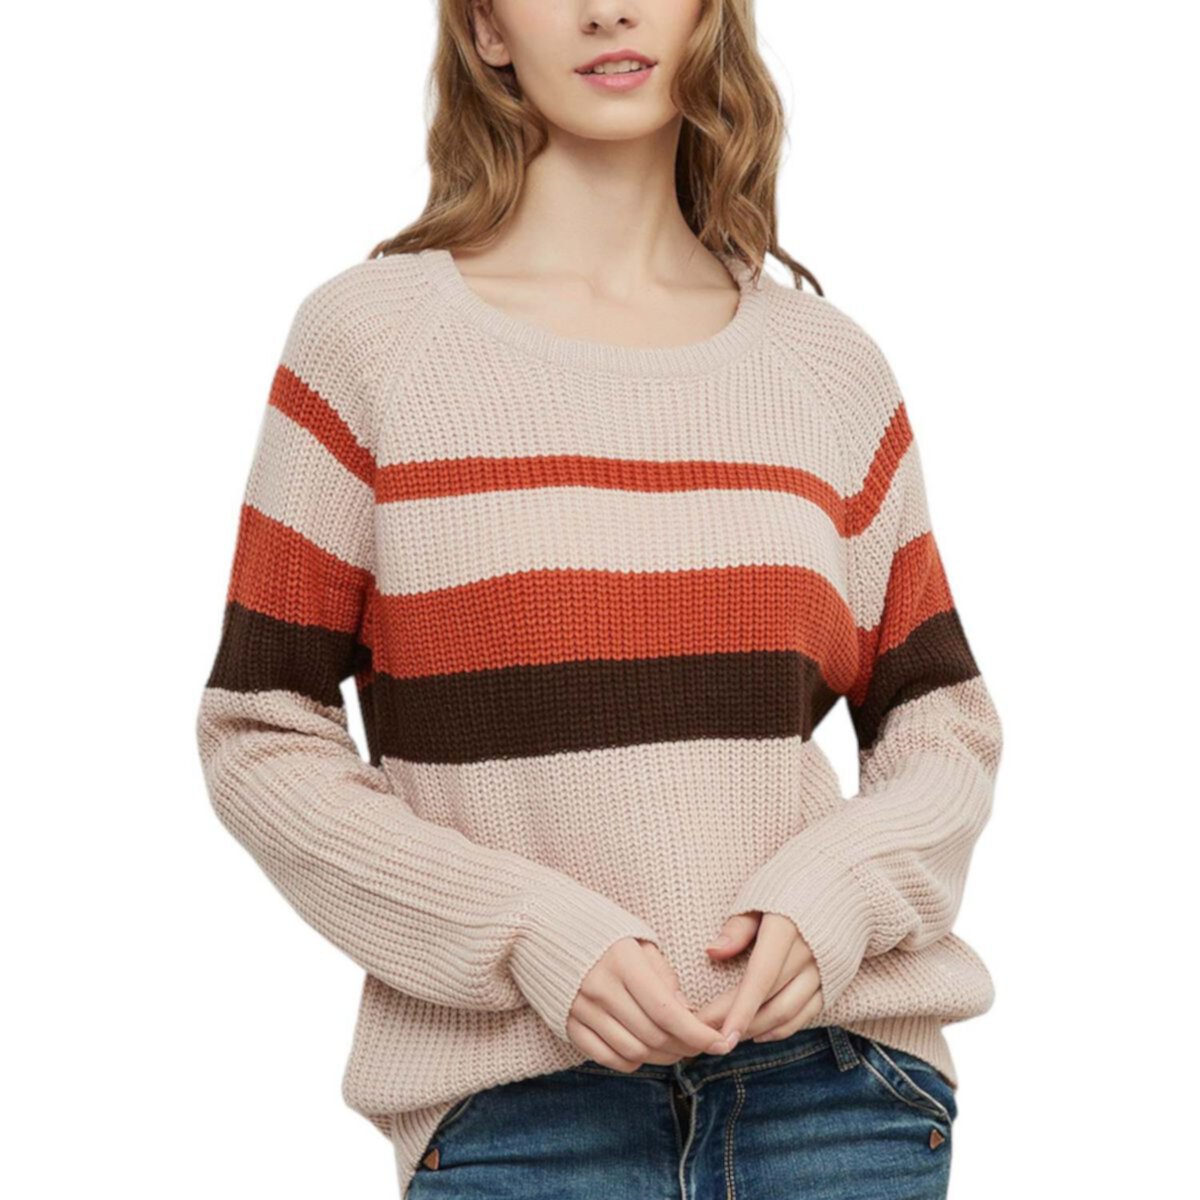 Women's Long Sleeve Color Block Striped Casual Pullover Sweater Anna-Kaci